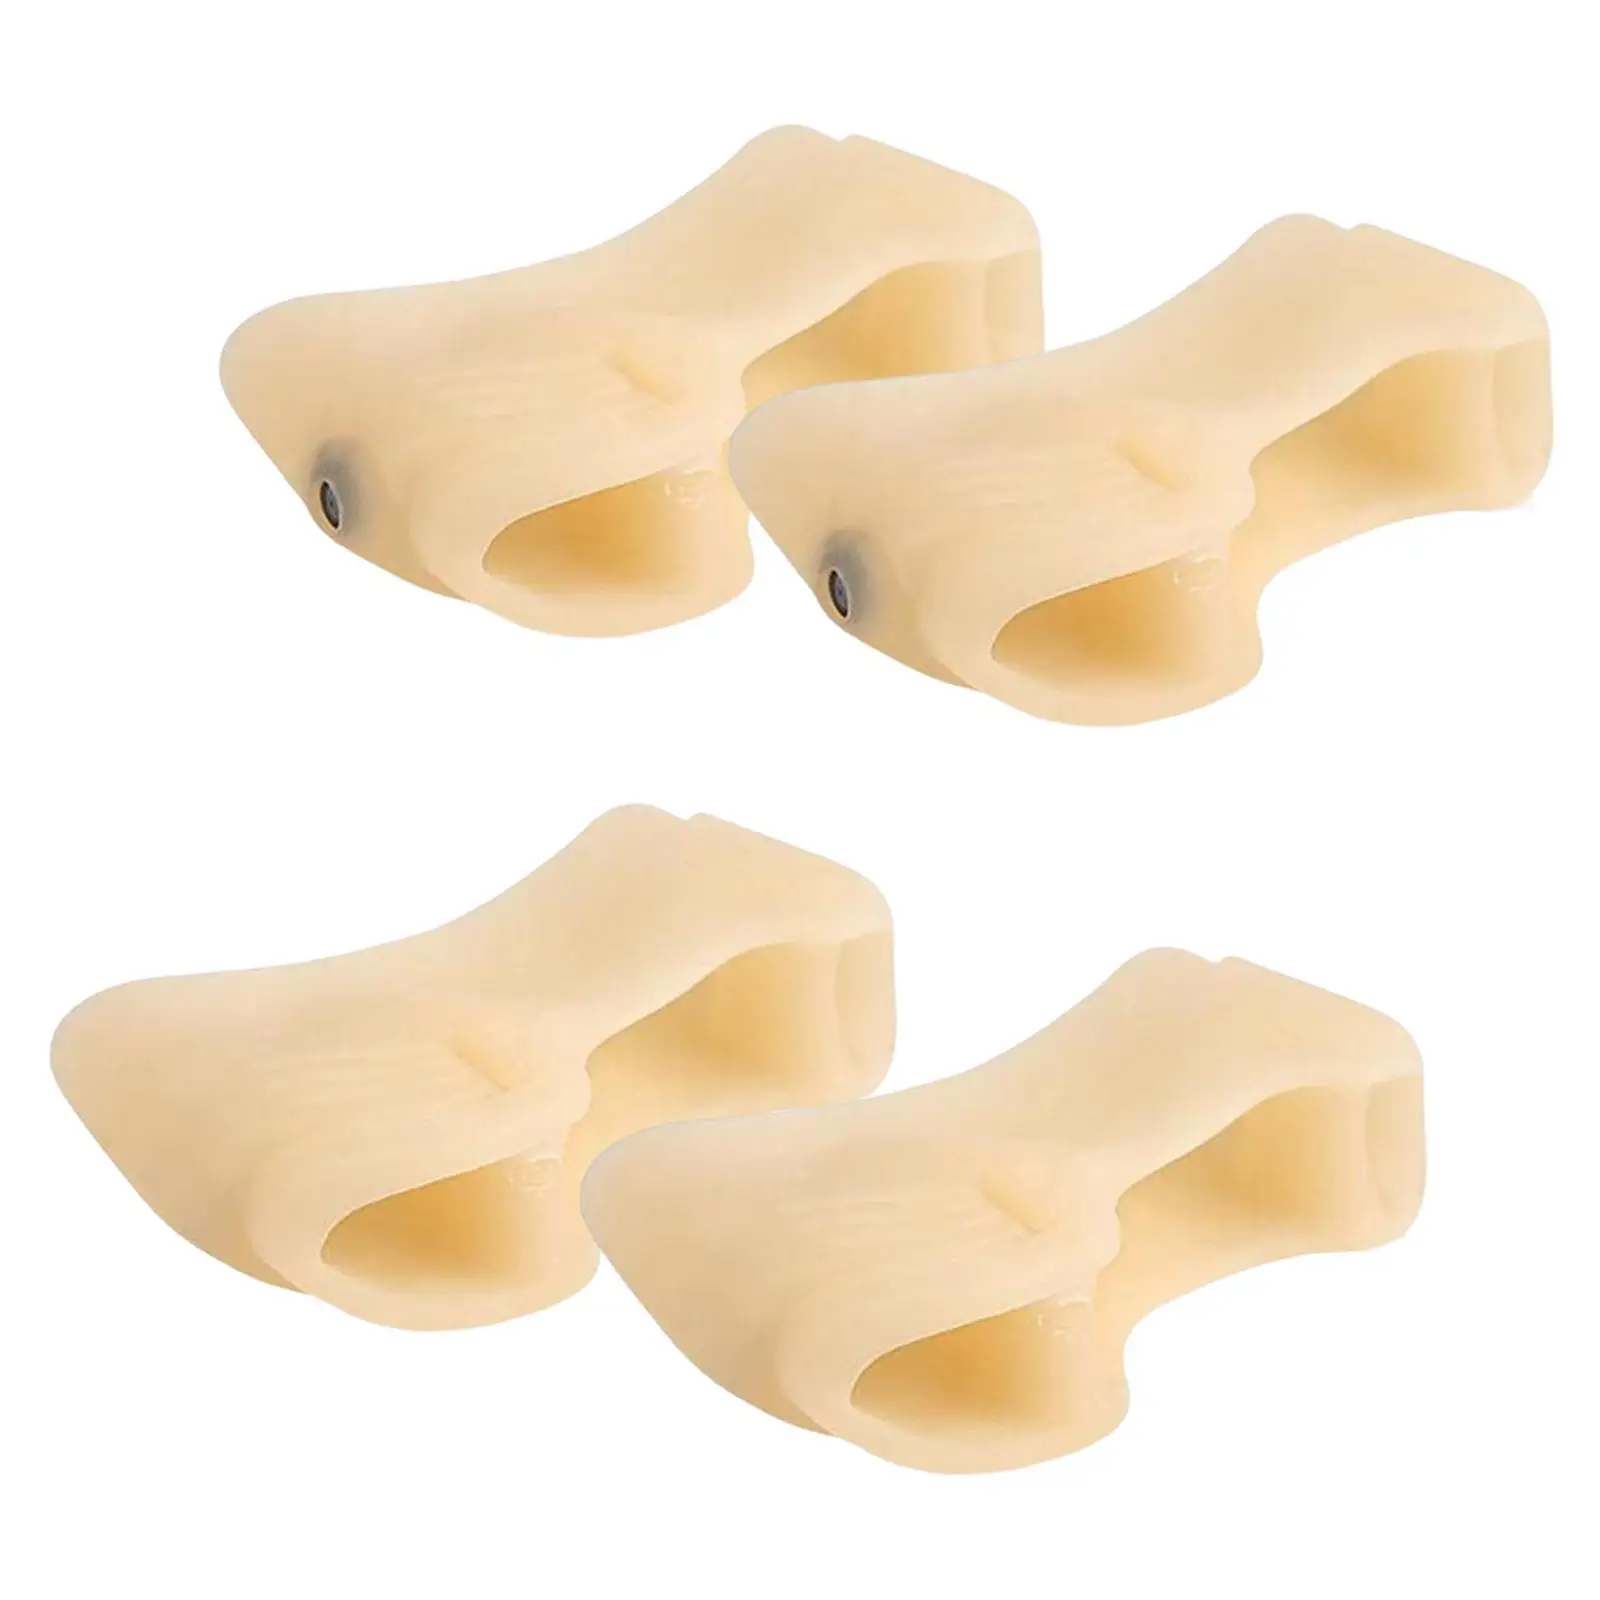 2 Pieces Toe Separator Bunion Corrector for Separating Overlapping Toes Sleeve Tube Unisex Wear Lightweight Comfortabl Universal